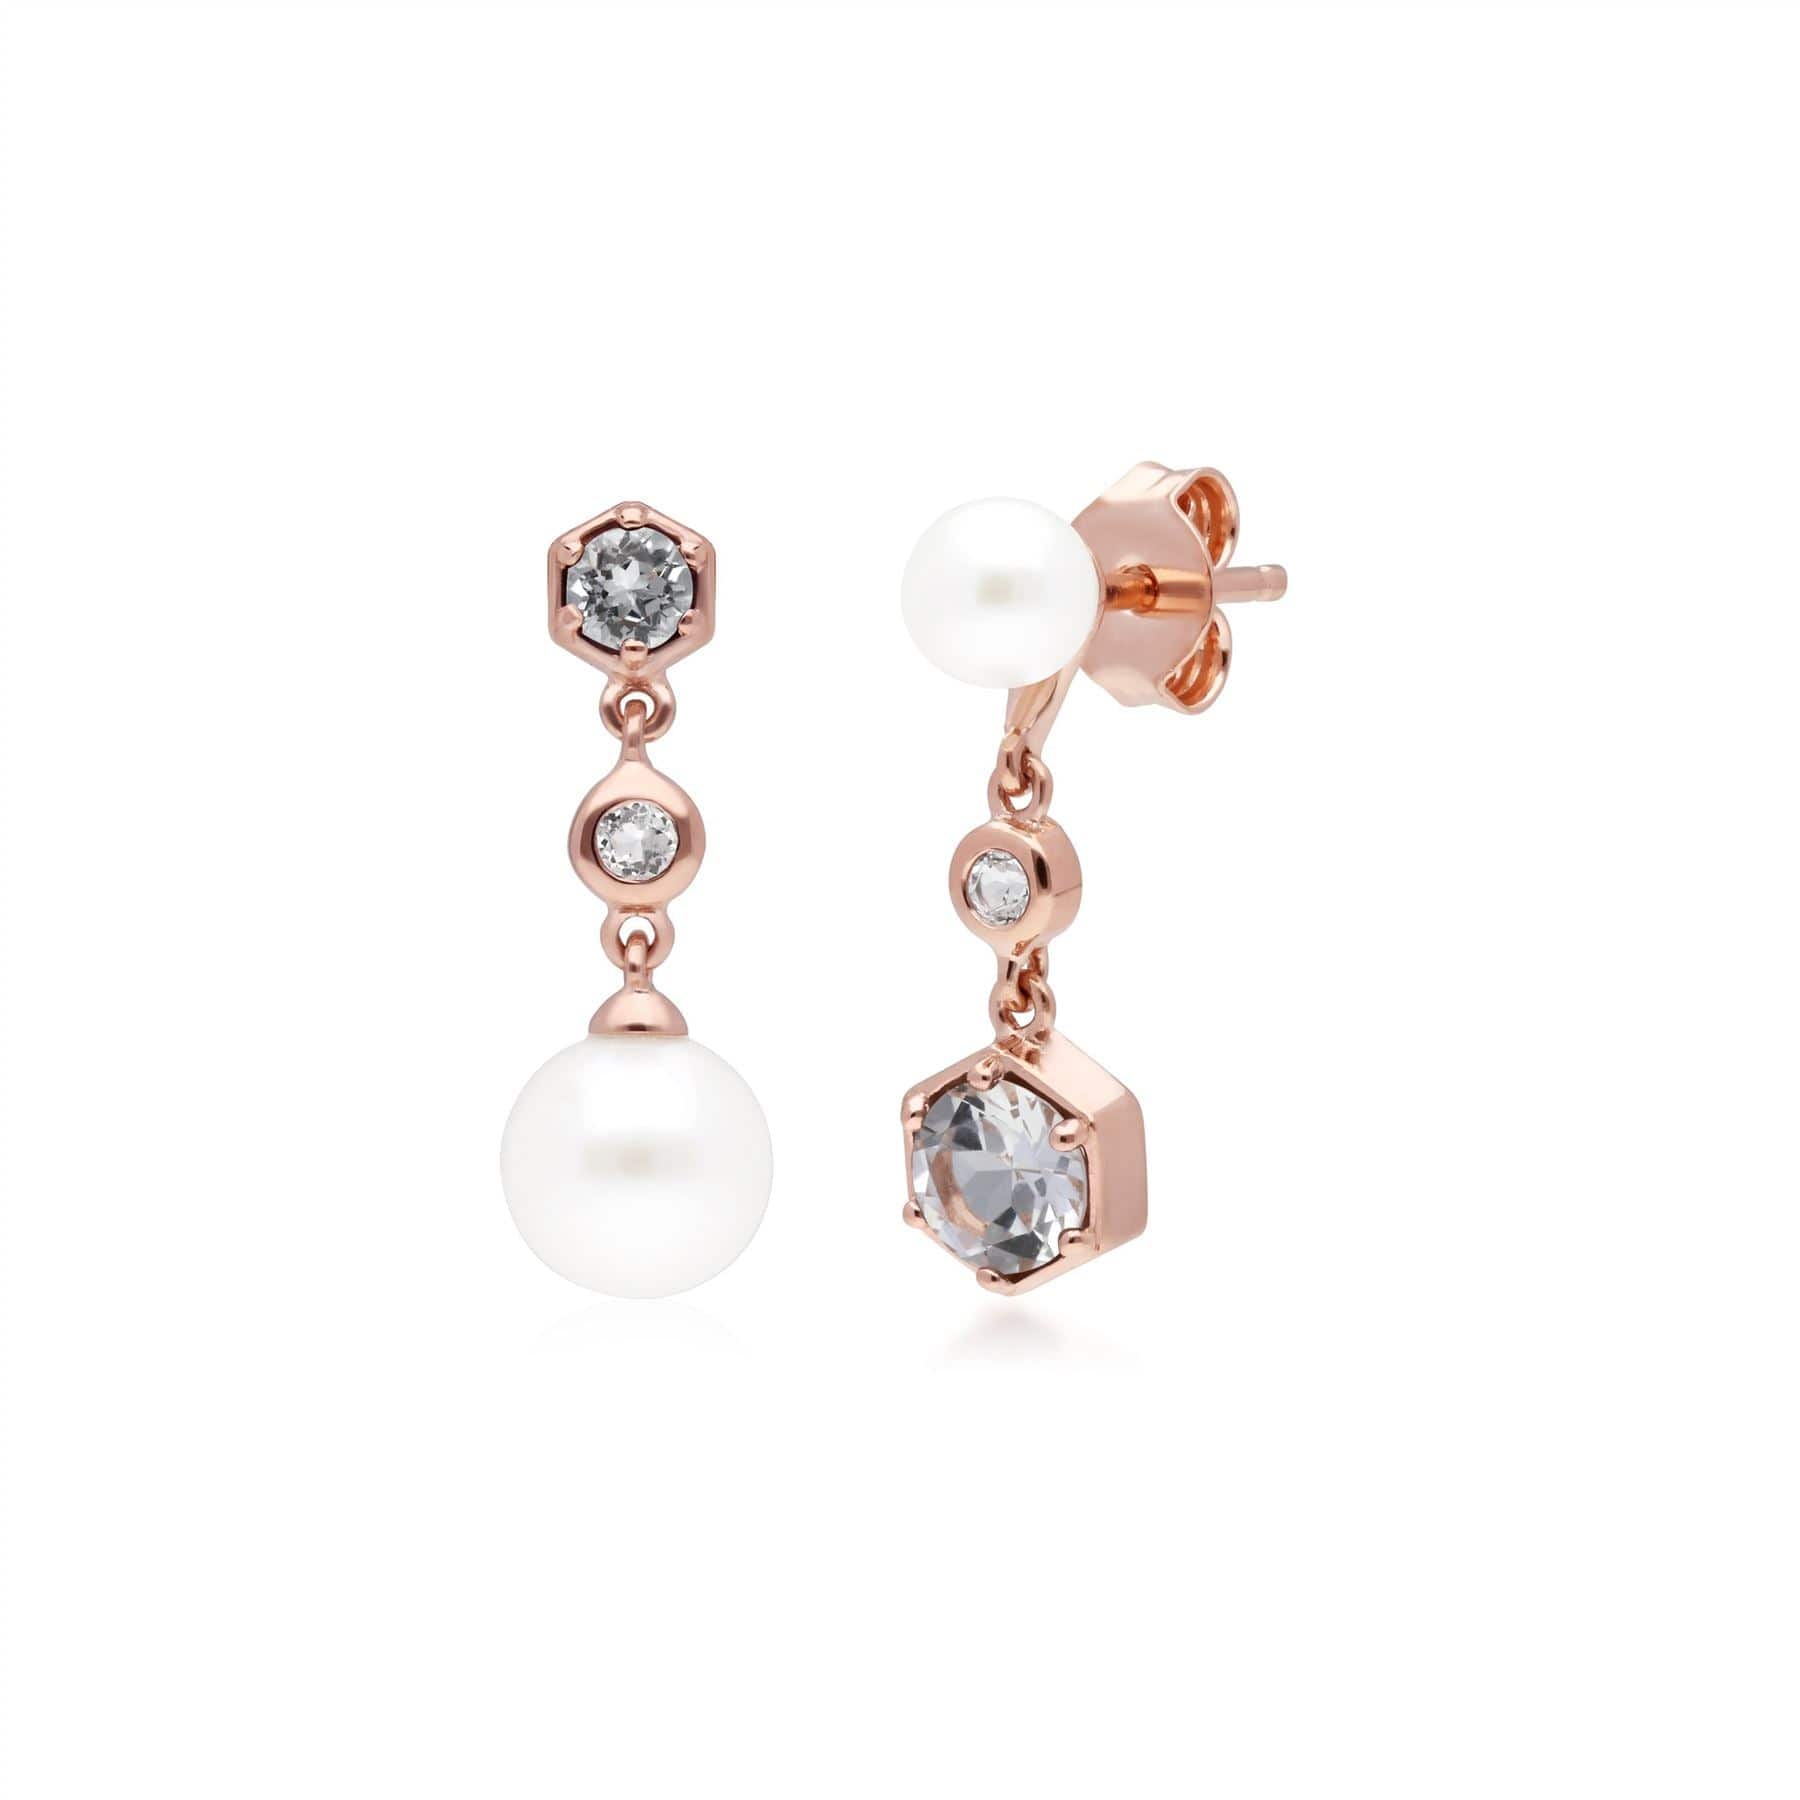 270E030309925 Modern Pearl, White Topaz Mismatched Drop Earrings in Rose Gold Plated Silver 1